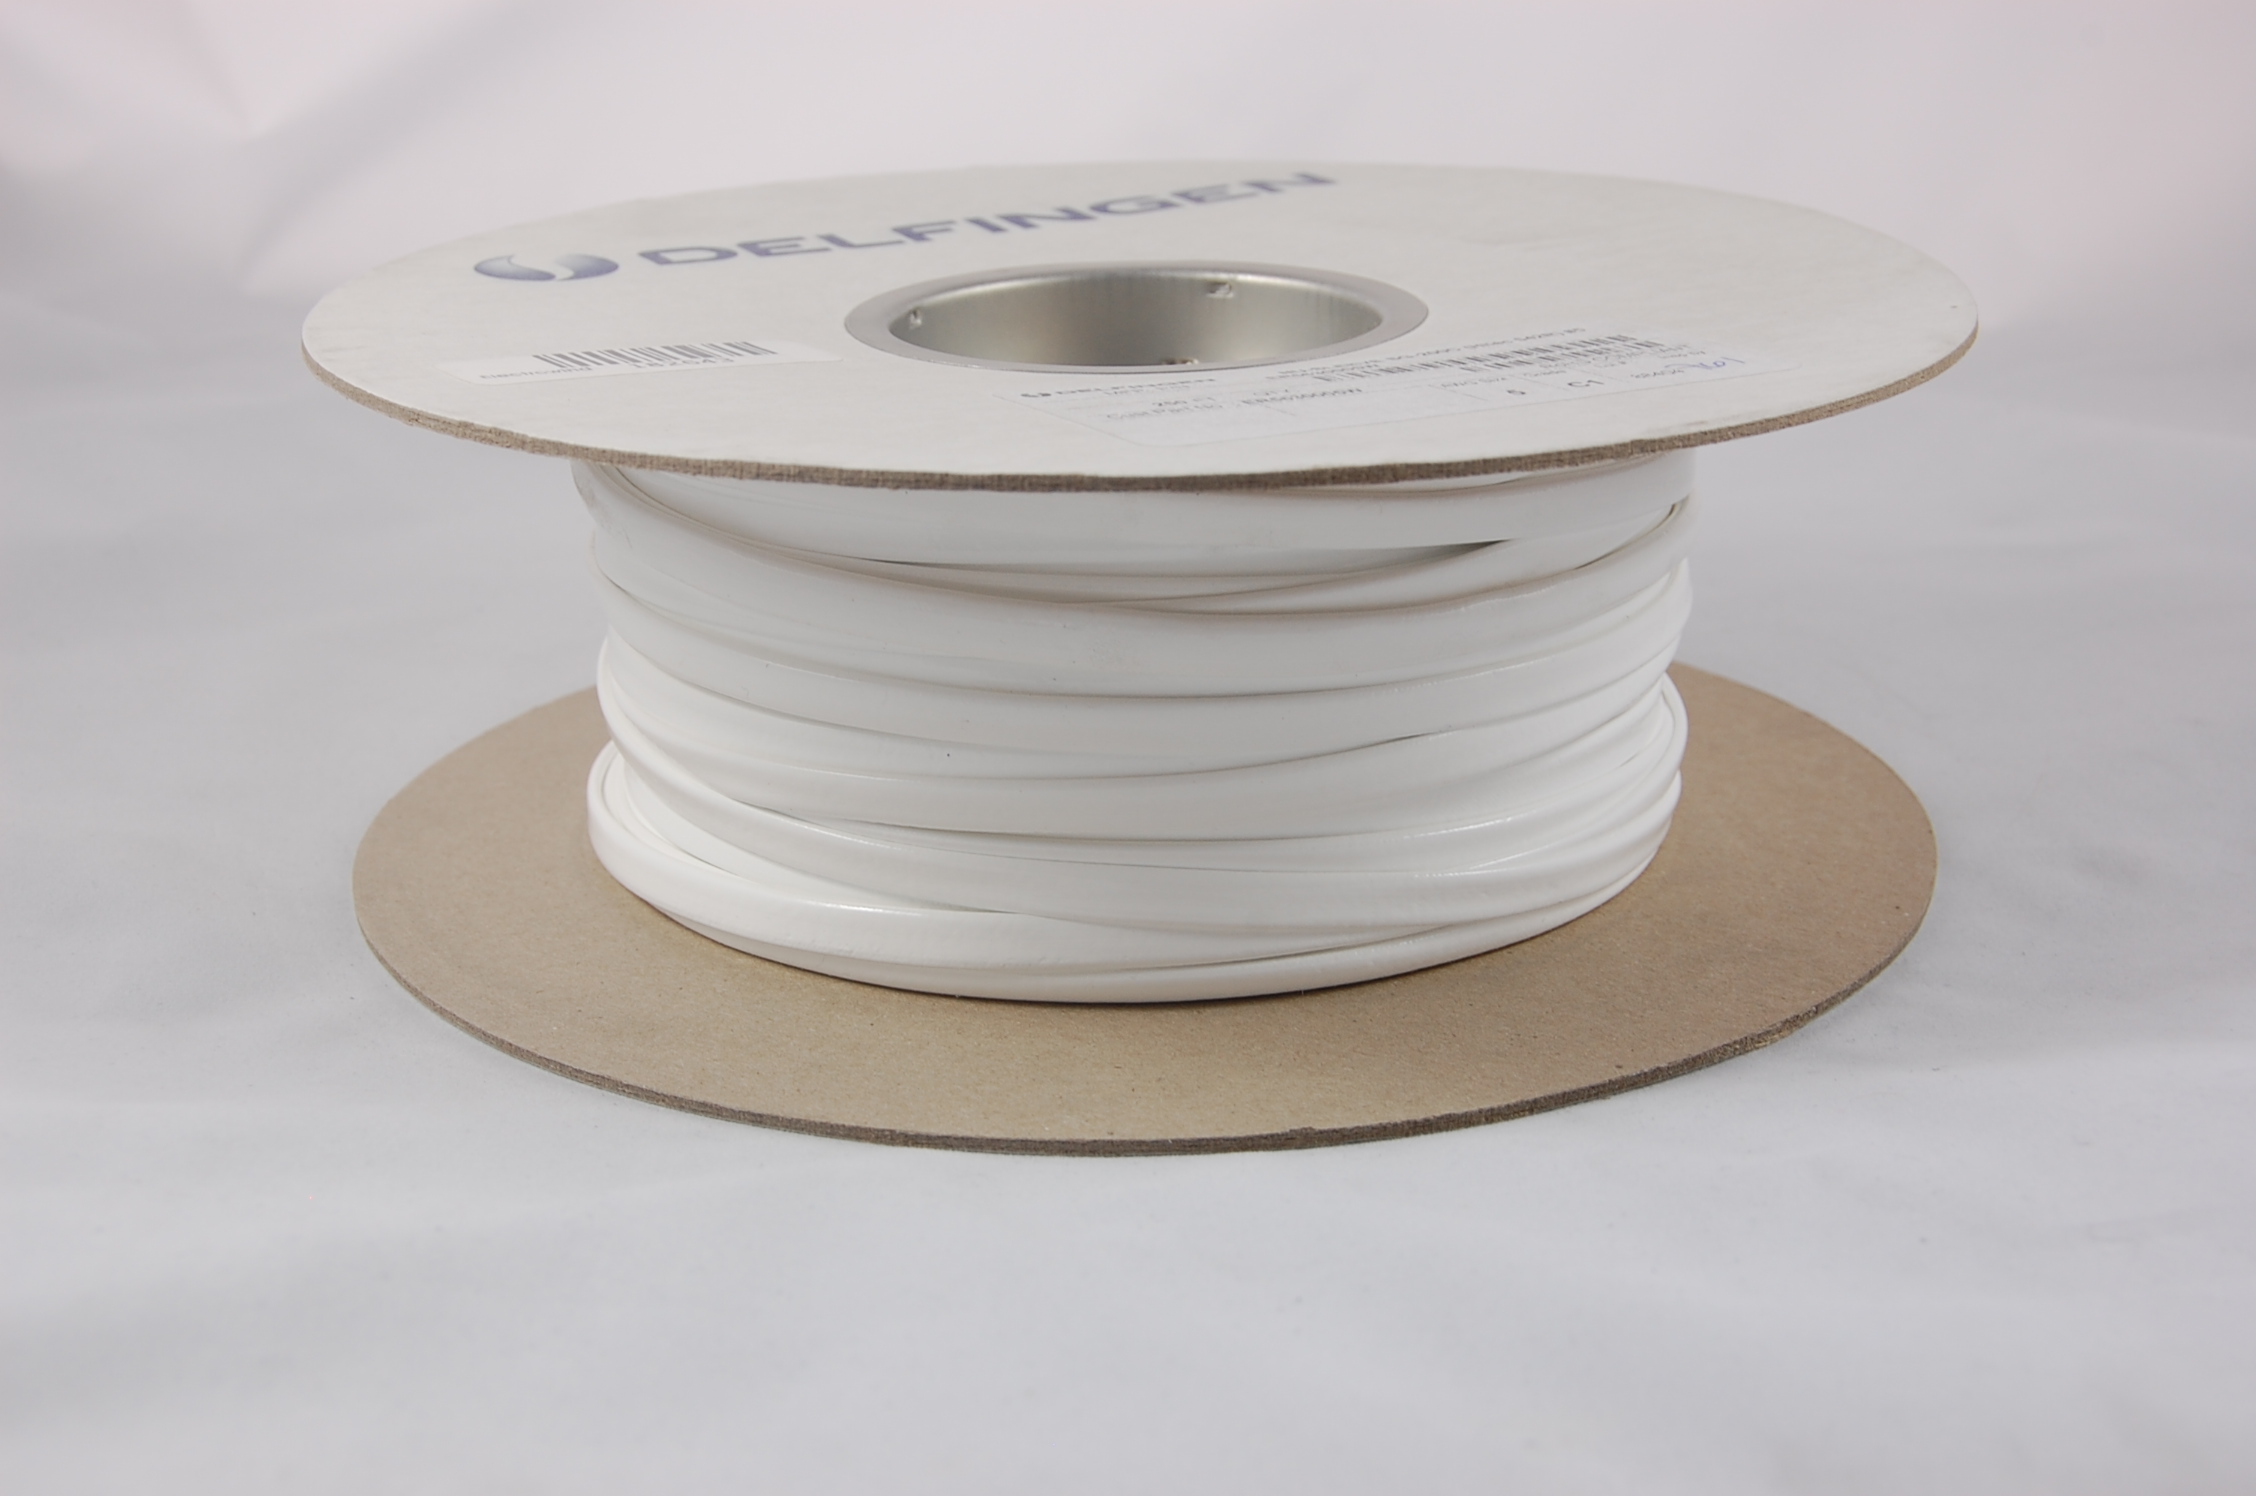 #1 AWG NU-SLEEVE SG-200 A (7000V) Silicone Rubber Coated Braided Fiberglass Sleeving (547F) 200°C, white, 100 FT per spool